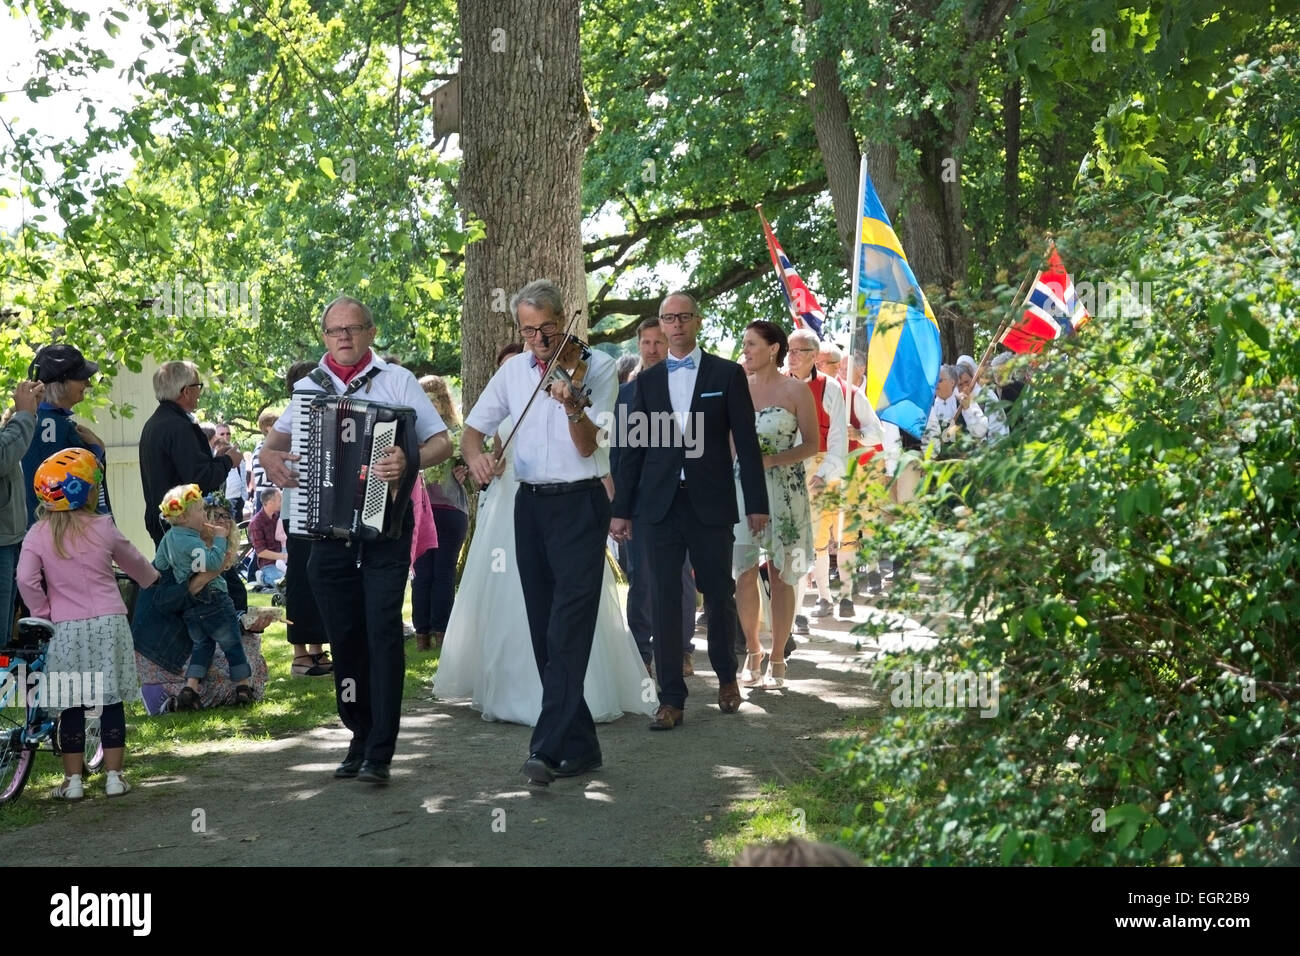 ALSTER, KARLSTAD, SWEDEN - JUNE 20, 2014: People at Midsummer celebrations and Norwegian - Swedish wedding on June 20, 2014 in A Stock Photo